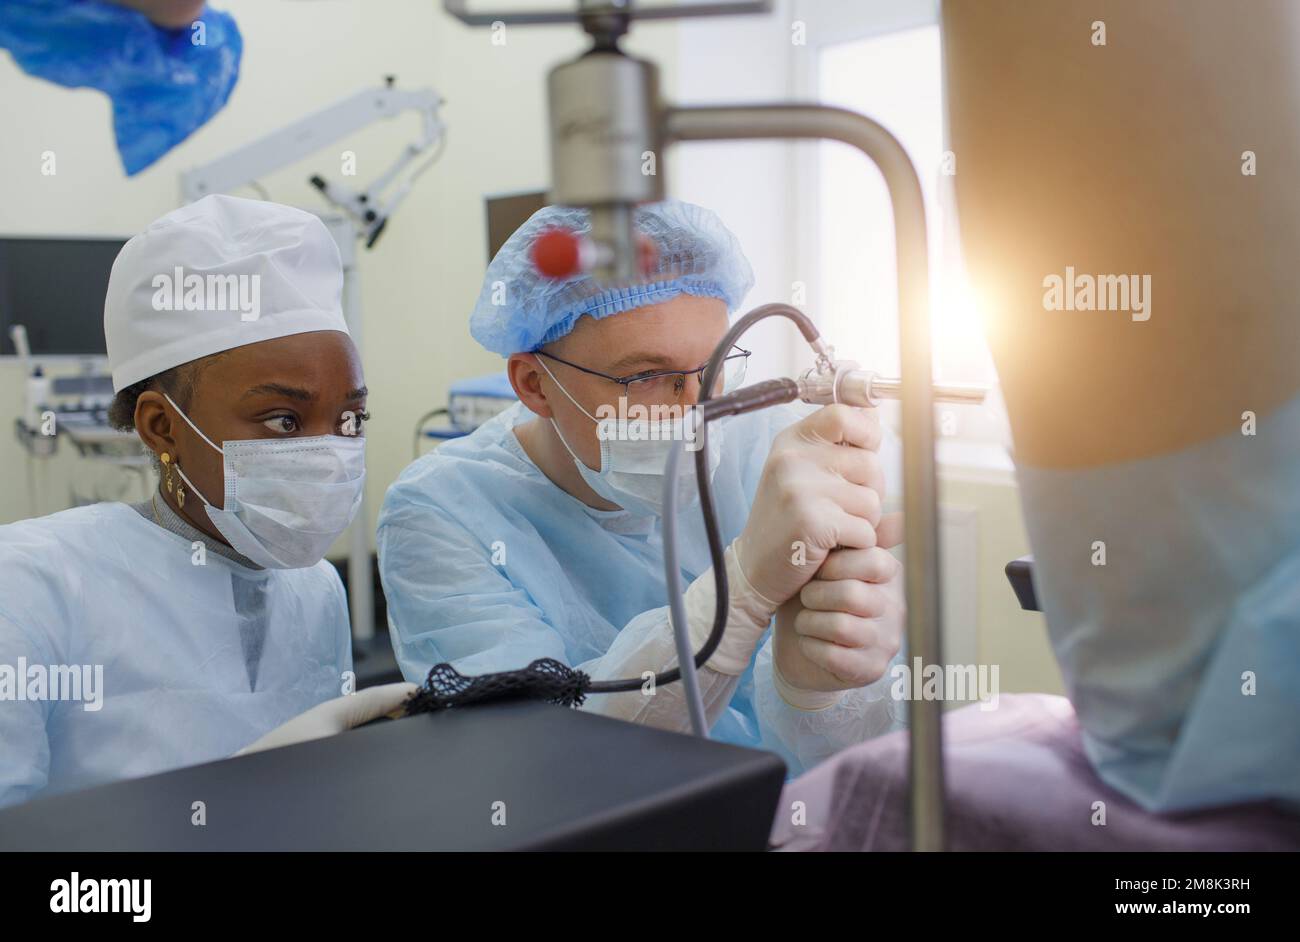 a proctologist with an assistant performs an operation on a patient lying on a proctological chair Stock Photo